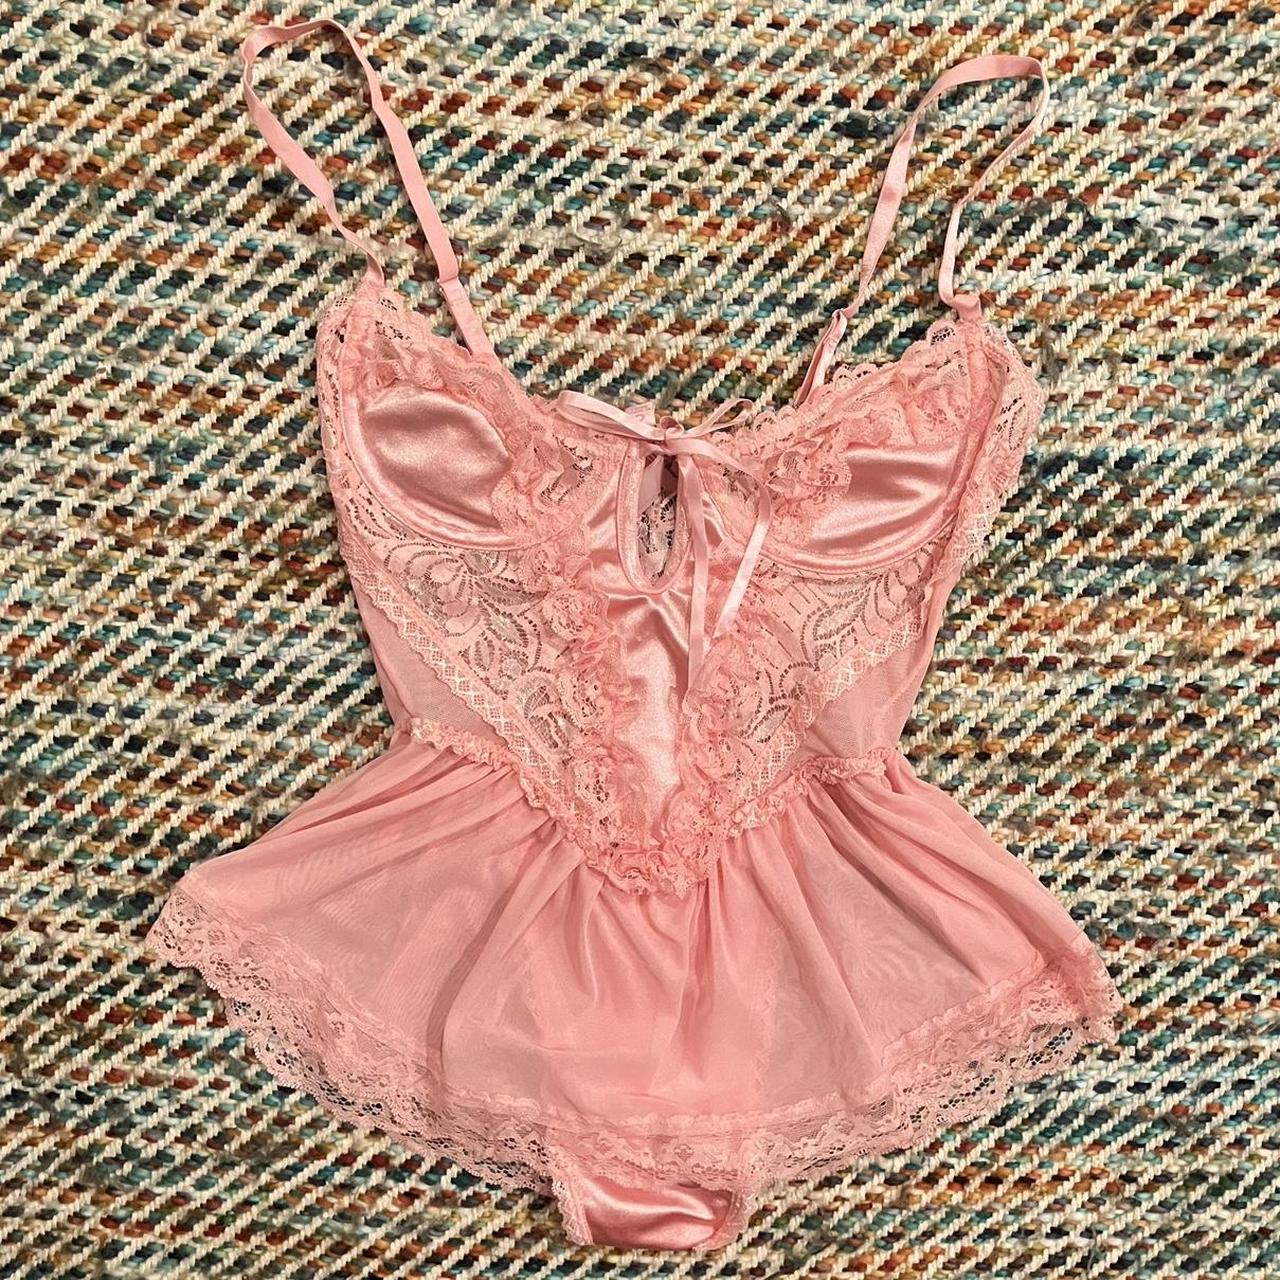 Yellow polka dot mesh / sheer bra with central bow.  - Depop